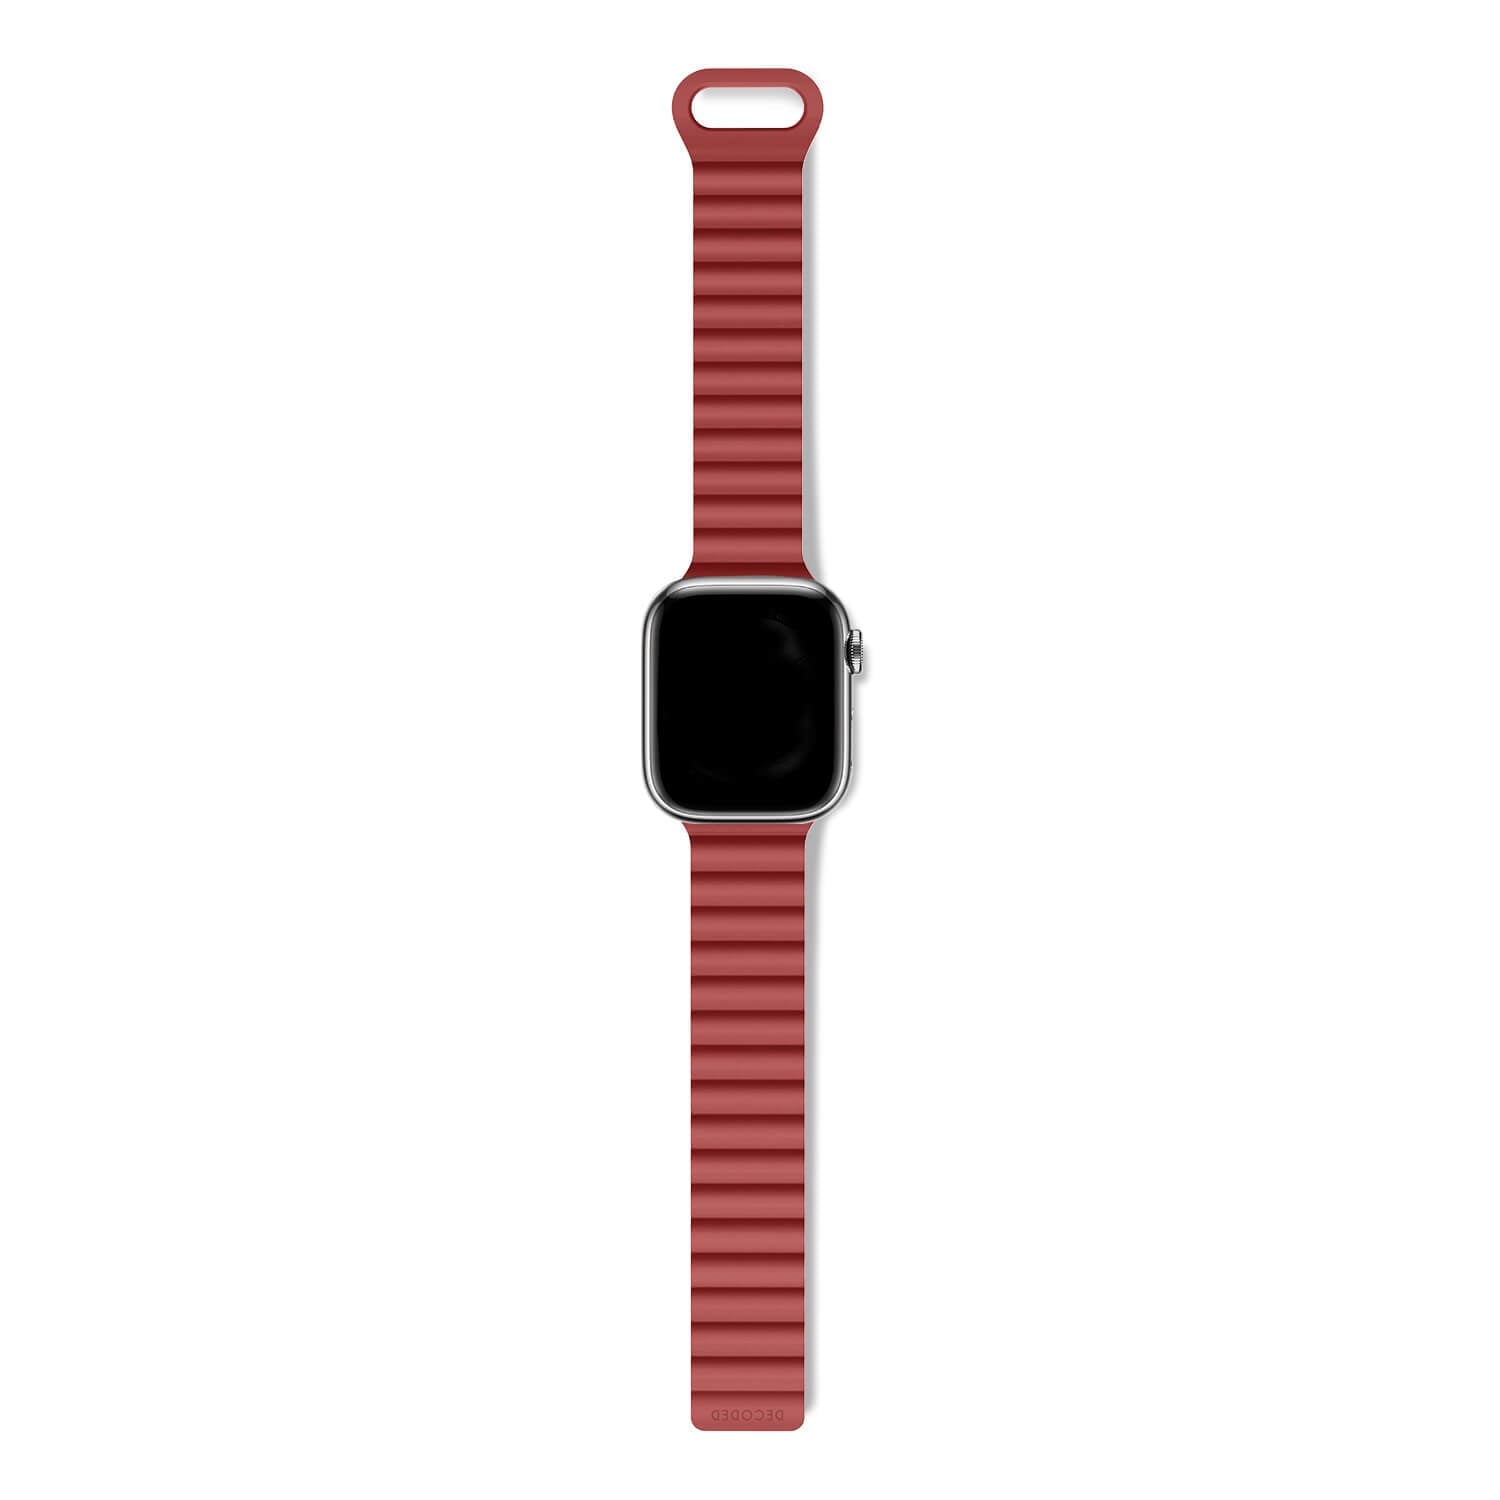 Silicone Traction Loop Strap Apple Watch 42mm, Astro Dust